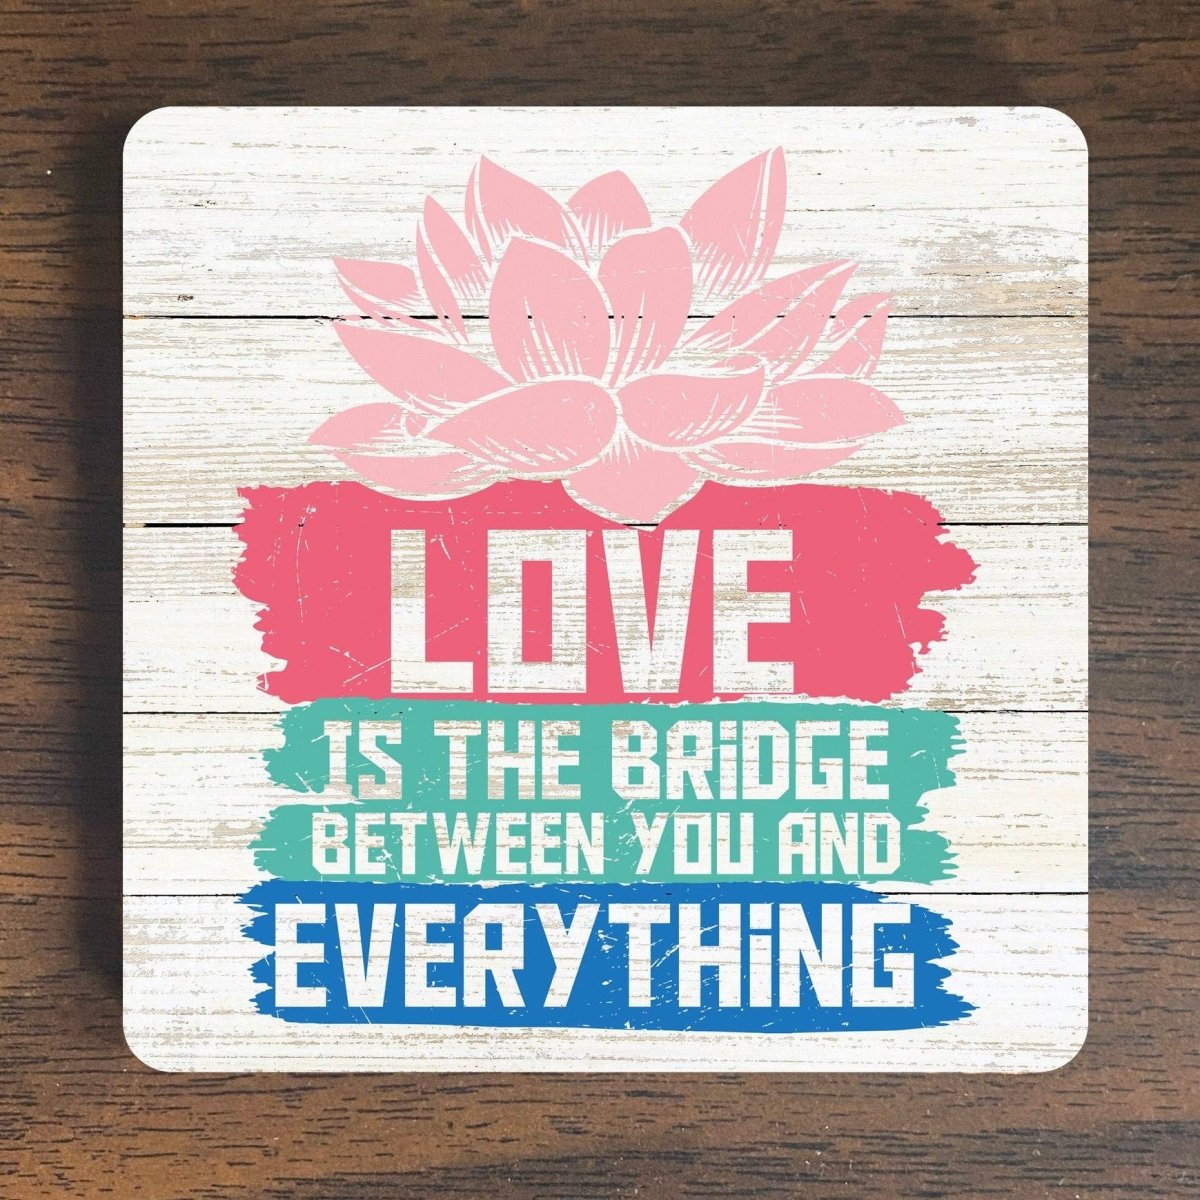 Magnets: Love is the Bridge Between You and Everything - #variant_color# - #variant_size# - #variant_option#